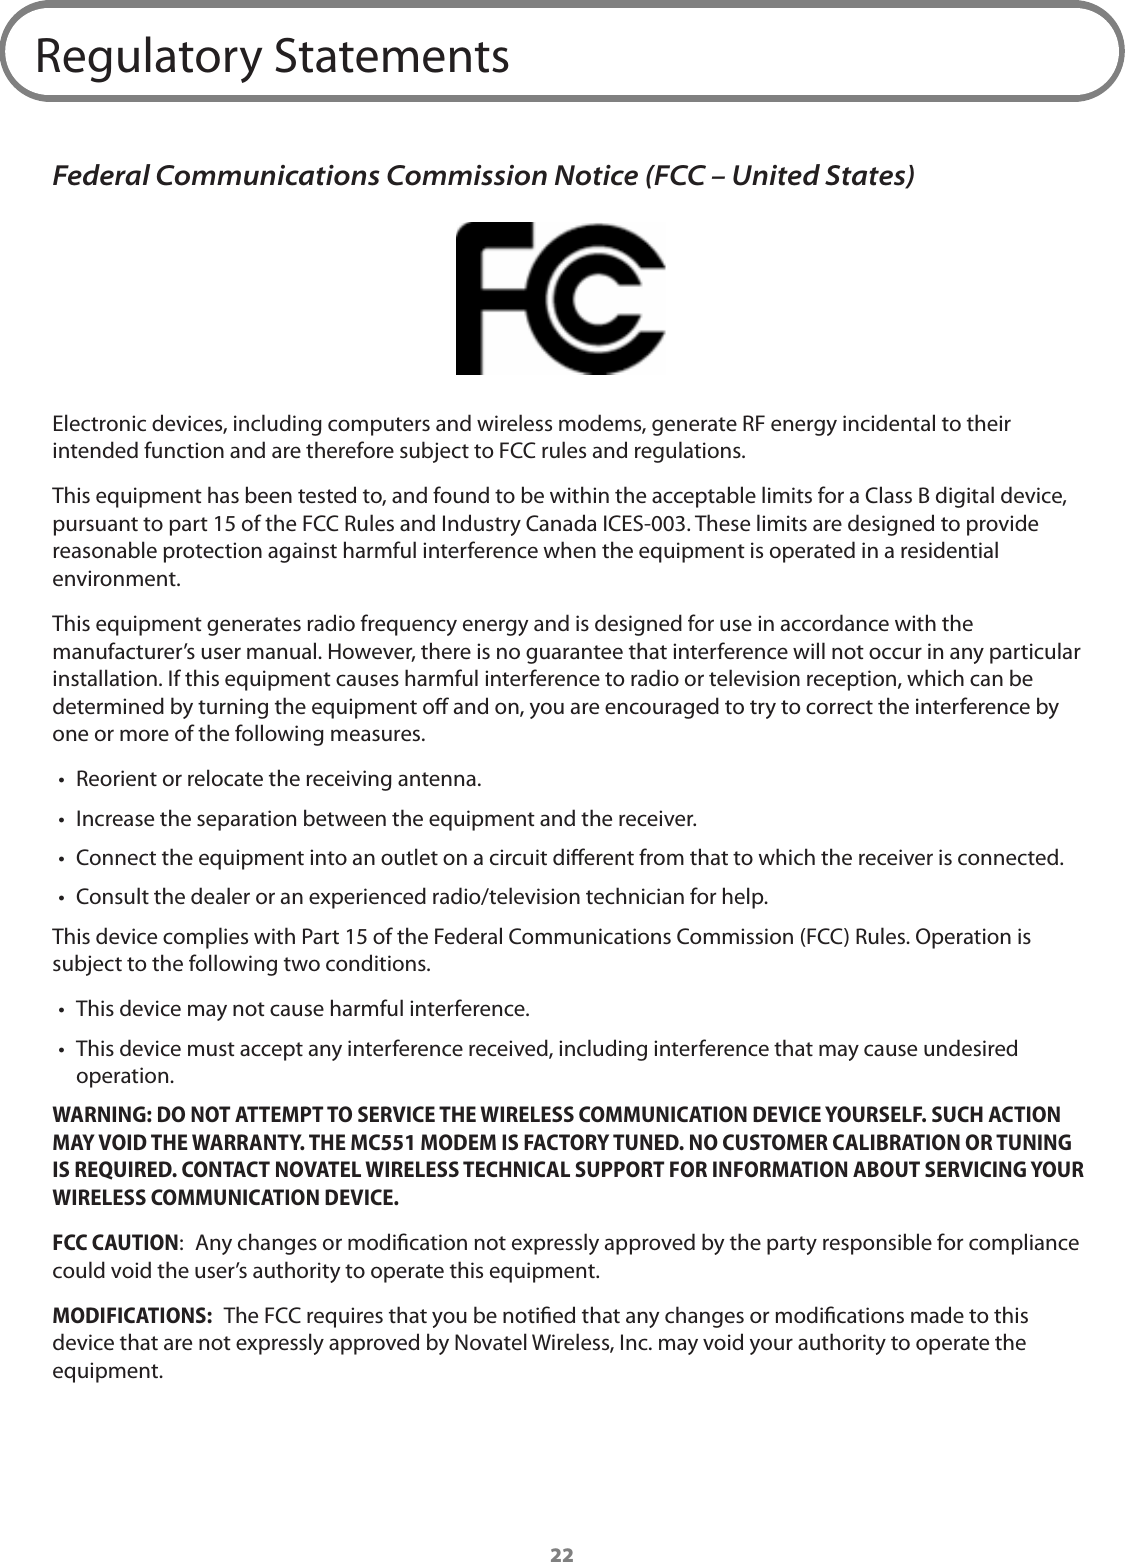 22Regulatory StatementsFederal Communications Commission Notice (FCC – United States)Electronic devices, including computers and wireless modems, generate RF energy incidental to their intended function and are therefore subject to FCC rules and regulations.This equipment has been tested to, and found to be within the acceptable limits for a Class B digital device, pursuant to part 15 of the FCC Rules and Industry Canada ICES-003. These limits are designed to provide reasonable protection against harmful interference when the equipment is operated in a residential environment.This equipment generates radio frequency energy and is designed for use in accordance with the manufacturer’s user manual. However, there is no guarantee that interference will not occur in any particular installation. If this equipment causes harmful interference to radio or television reception, which can be determined by turning the equipment o and on, you are encouraged to try to correct the interference by one or more of the following measures.•  Reorient or relocate the receiving antenna.•  Increase the separation between the equipment and the receiver.•  Connect the equipment into an outlet on a circuit dierent from that to which the receiver is connected.•  Consult the dealer or an experienced radio/television technician for help.This device complies with Part 15 of the Federal Communications Commission (FCC) Rules. Operation is subject to the following two conditions.•  This device may not cause harmful interference.•  This device must accept any interference received, including interference that may cause undesired operation.WARNING: DO NOT ATTEMPT TO SERVICE THE WIRELESS COMMUNICATION DEVICE YOURSELF. SUCH ACTION MAY VOID THE WARRANTY. THE MC551 MODEM IS FACTORY TUNED. NO CUSTOMER CALIBRATION OR TUNING IS REQUIRED. CONTACT NOVATEL WIRELESS TECHNICAL SUPPORT FOR INFORMATION ABOUT SERVICING YOUR WIRELESS COMMUNICATION DEVICE.FCC CAUTION:  Any changes or modication not expressly approved by the party responsible for compliance could void the user’s authority to operate this equipment.MODIFICATIONS:  The FCC requires that you be notied that any changes or modications made to this device that are not expressly approved by Novatel Wireless, Inc. may void your authority to operate the equipment. 